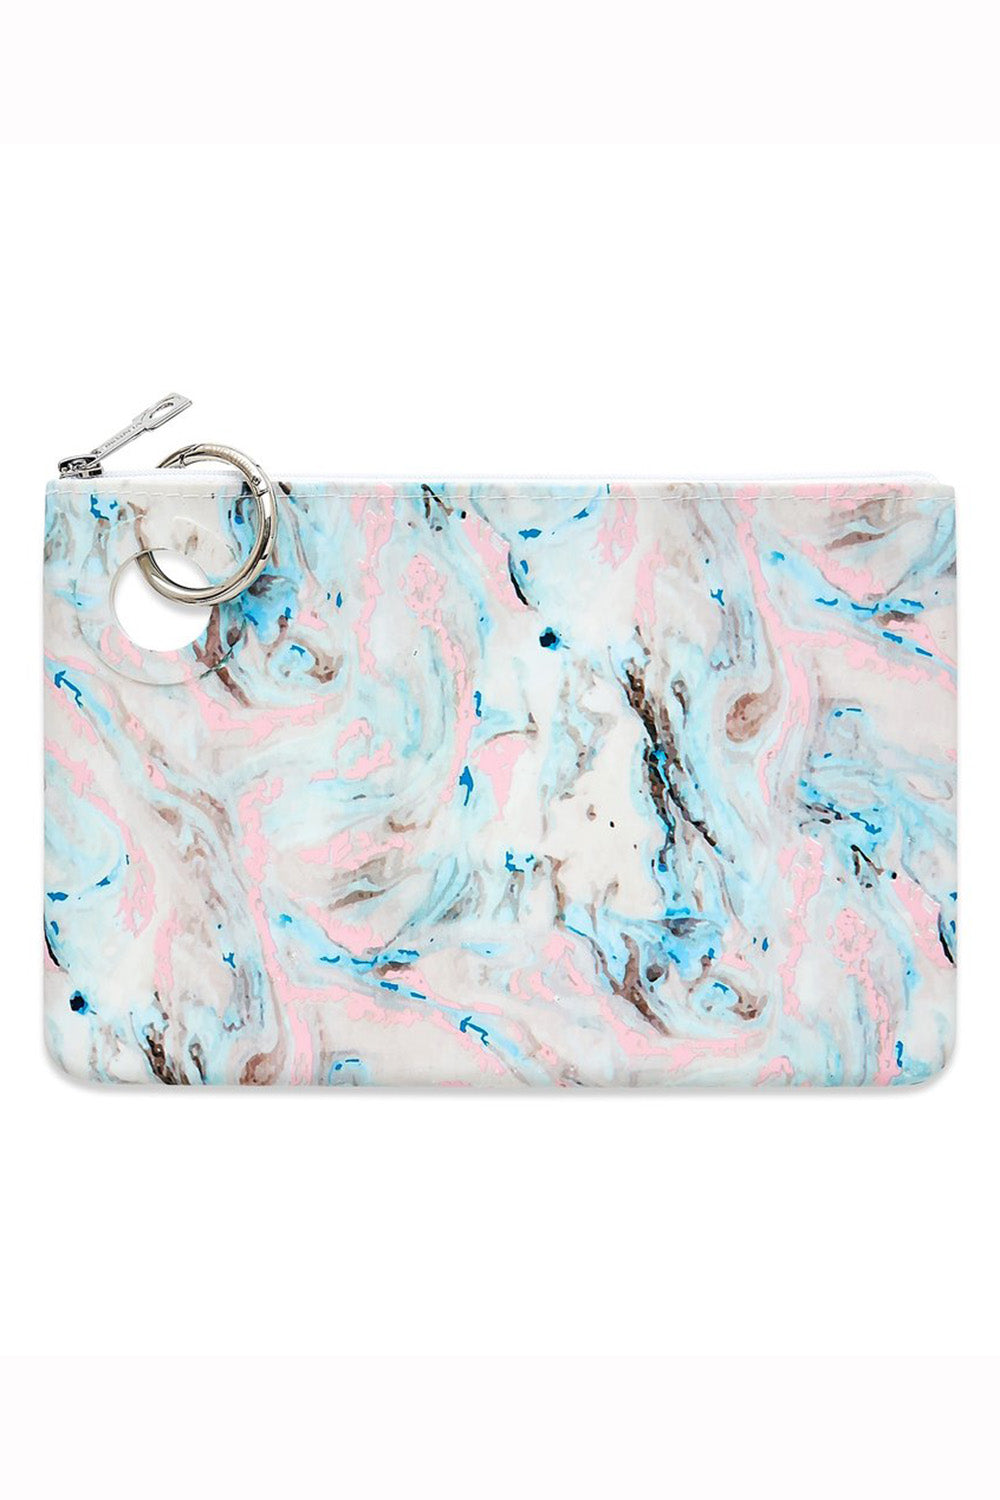 Silicone Pouch Large - Marble Pastel